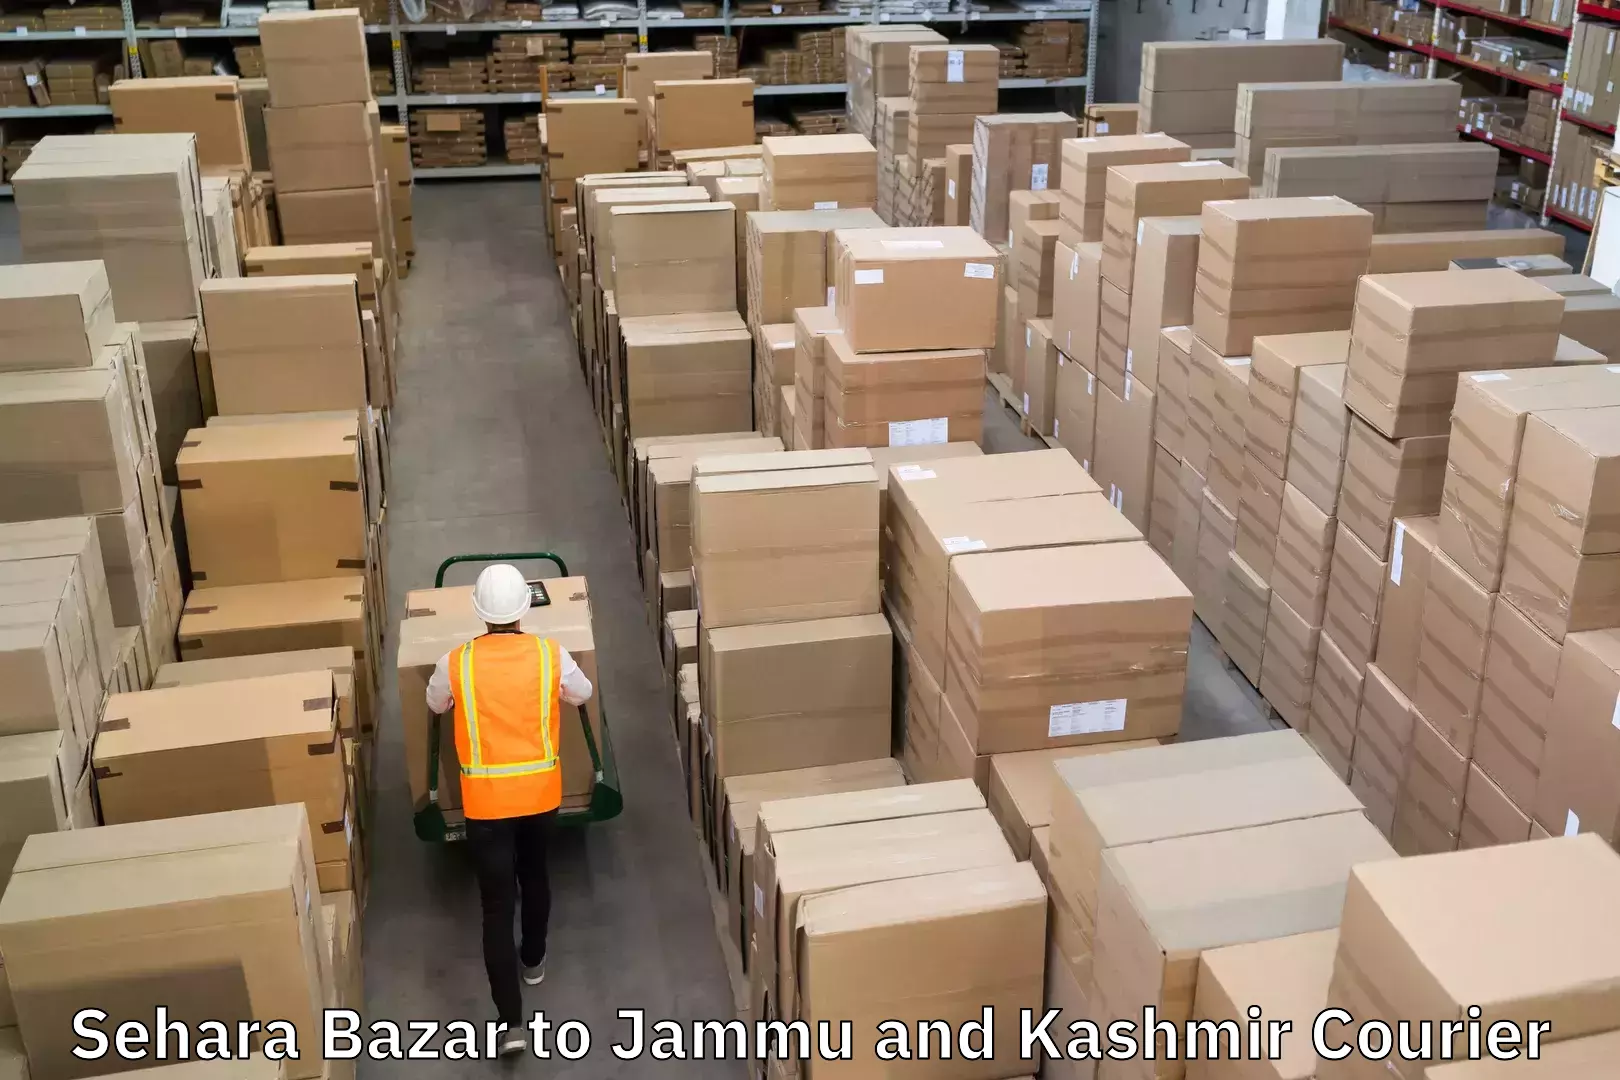 Express delivery capabilities Sehara Bazar to Jammu and Kashmir